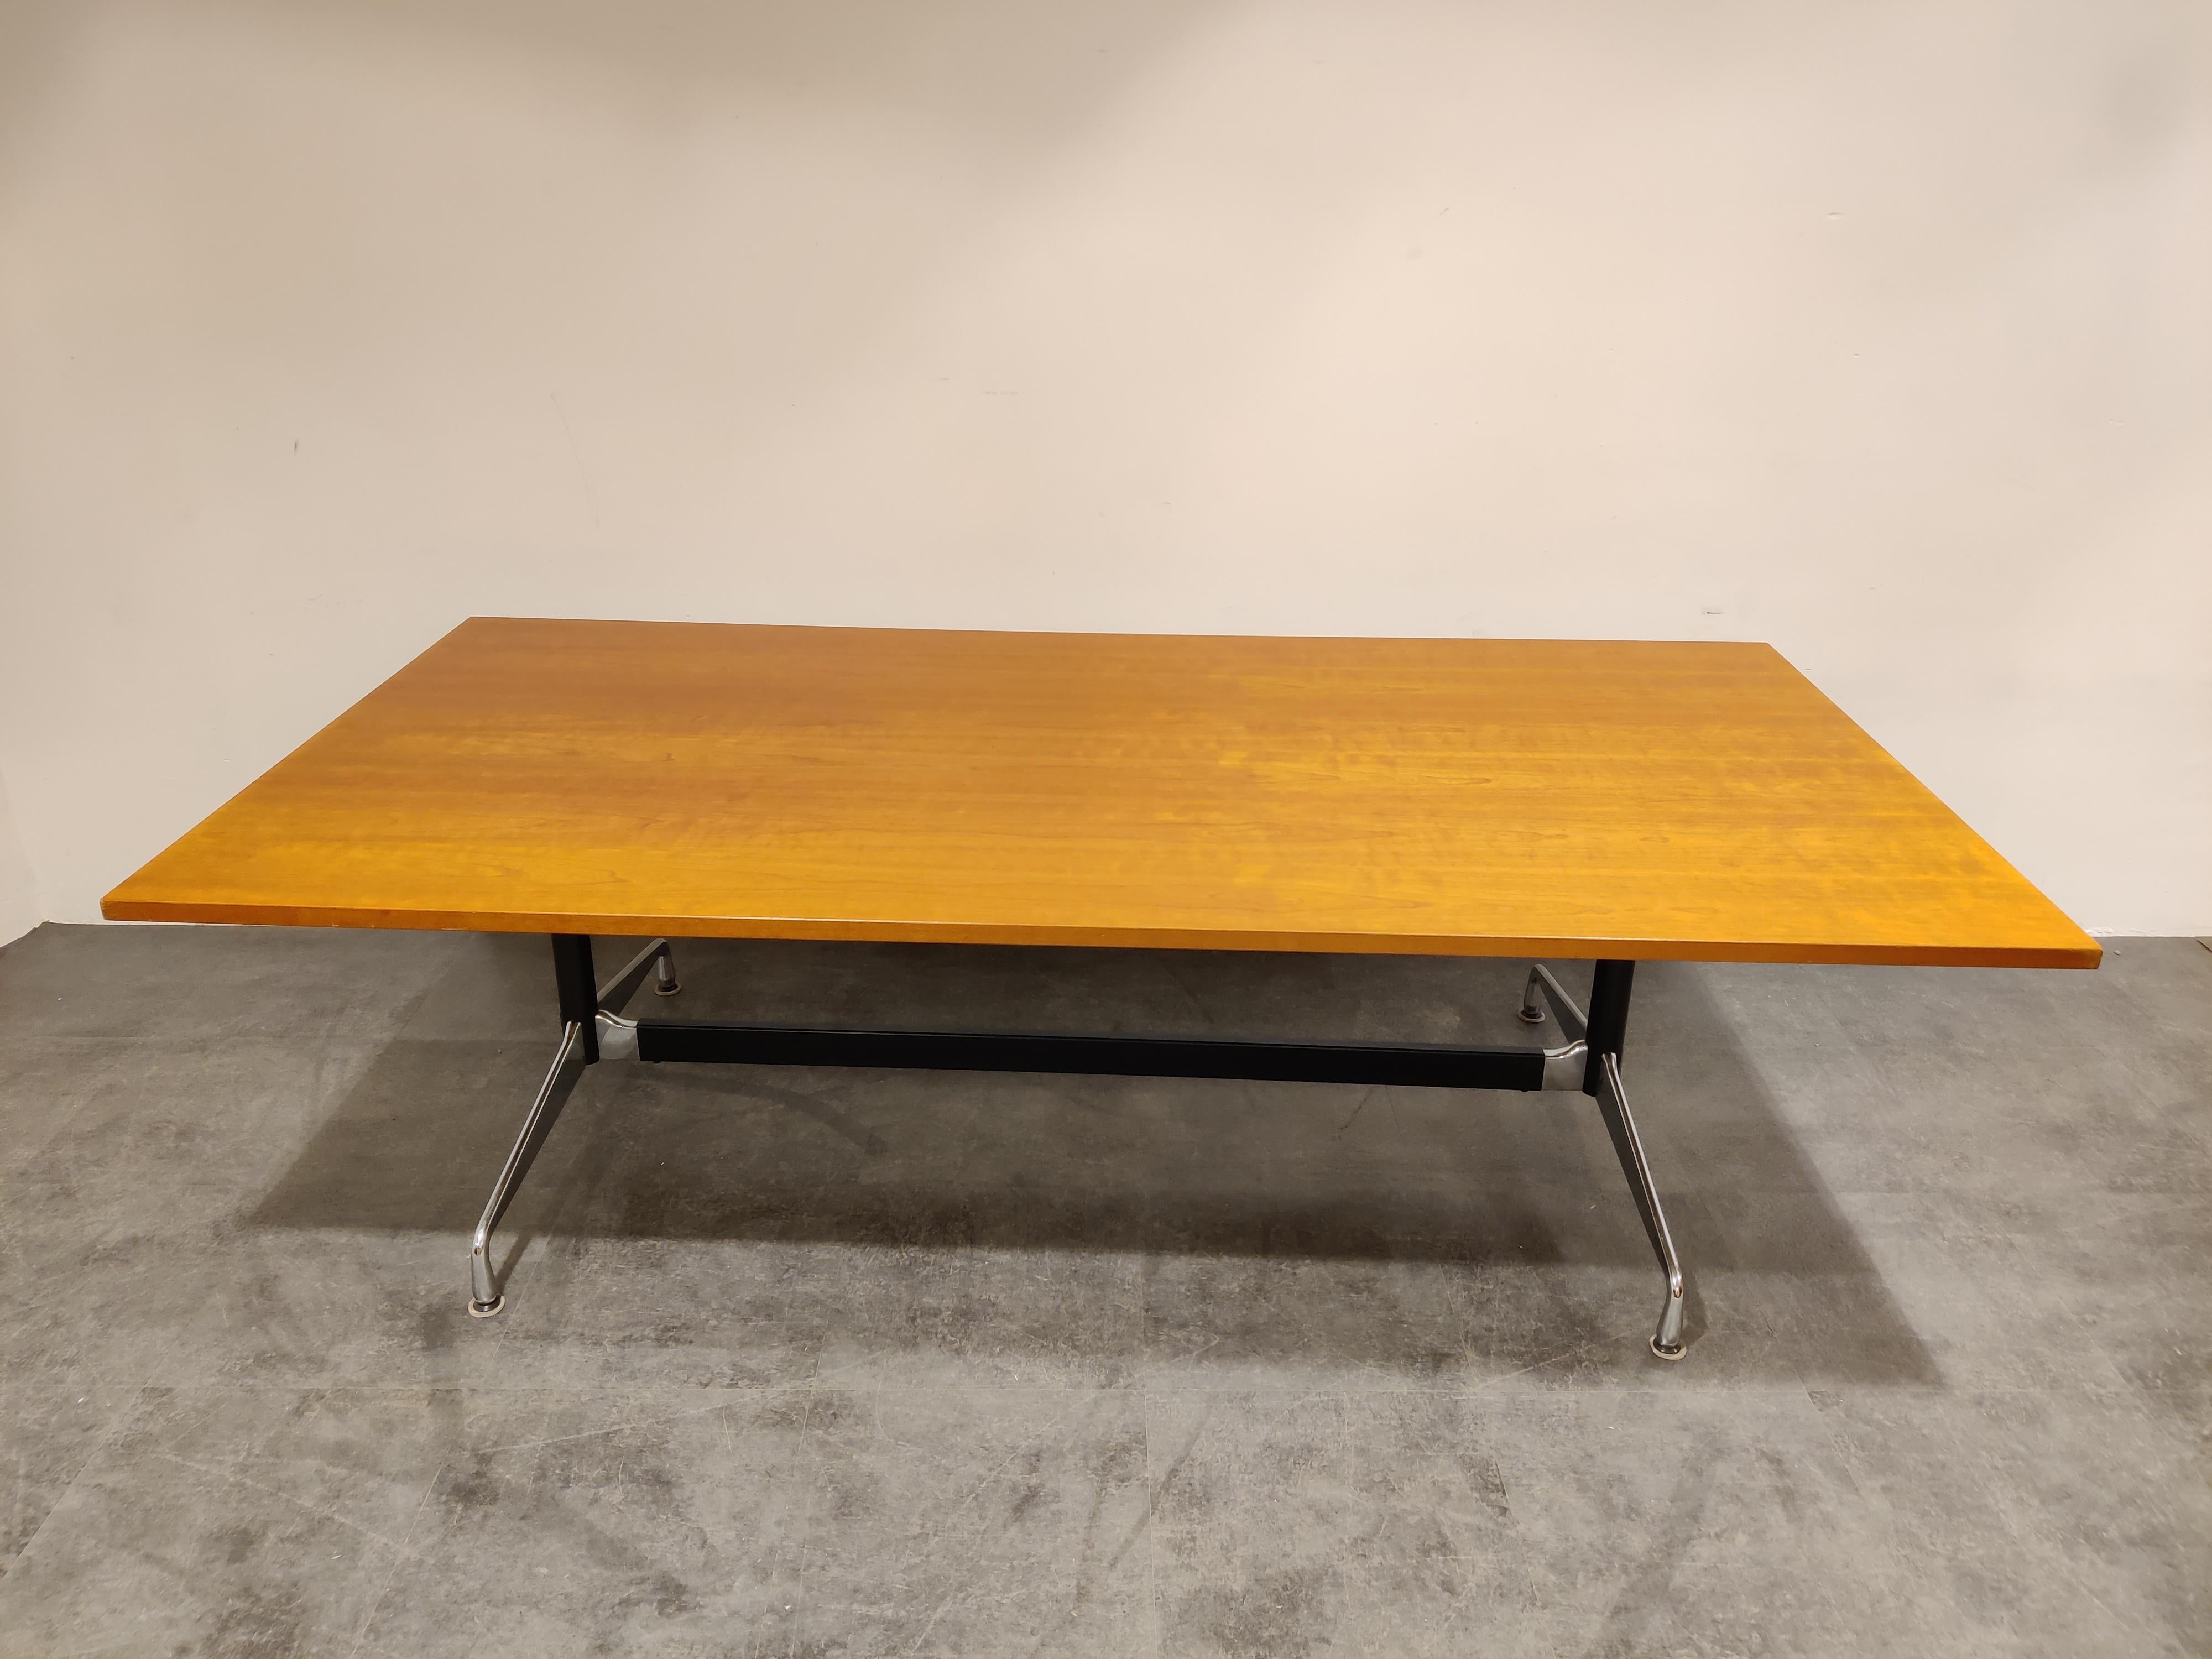 Large vintage dining table, conference table by Charles and Ray Eames for Herman Miller.

Nice and sturdy wooden top with a chrome aluminum base.

The table is in good original condition, small damage to the corners.

Great statement piece in your